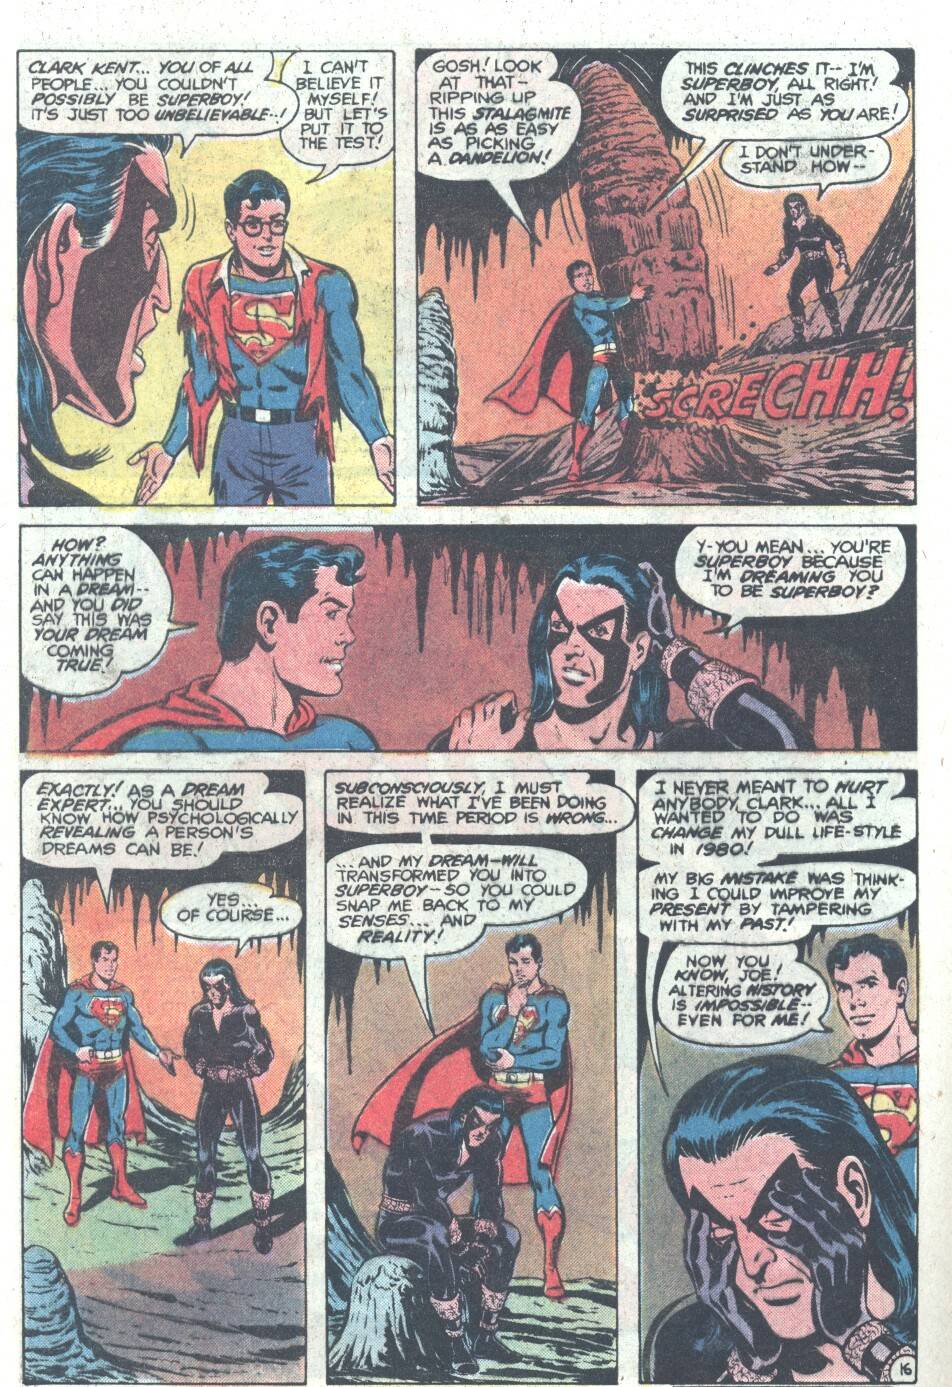 The New Adventures of Superboy 4 Page 16